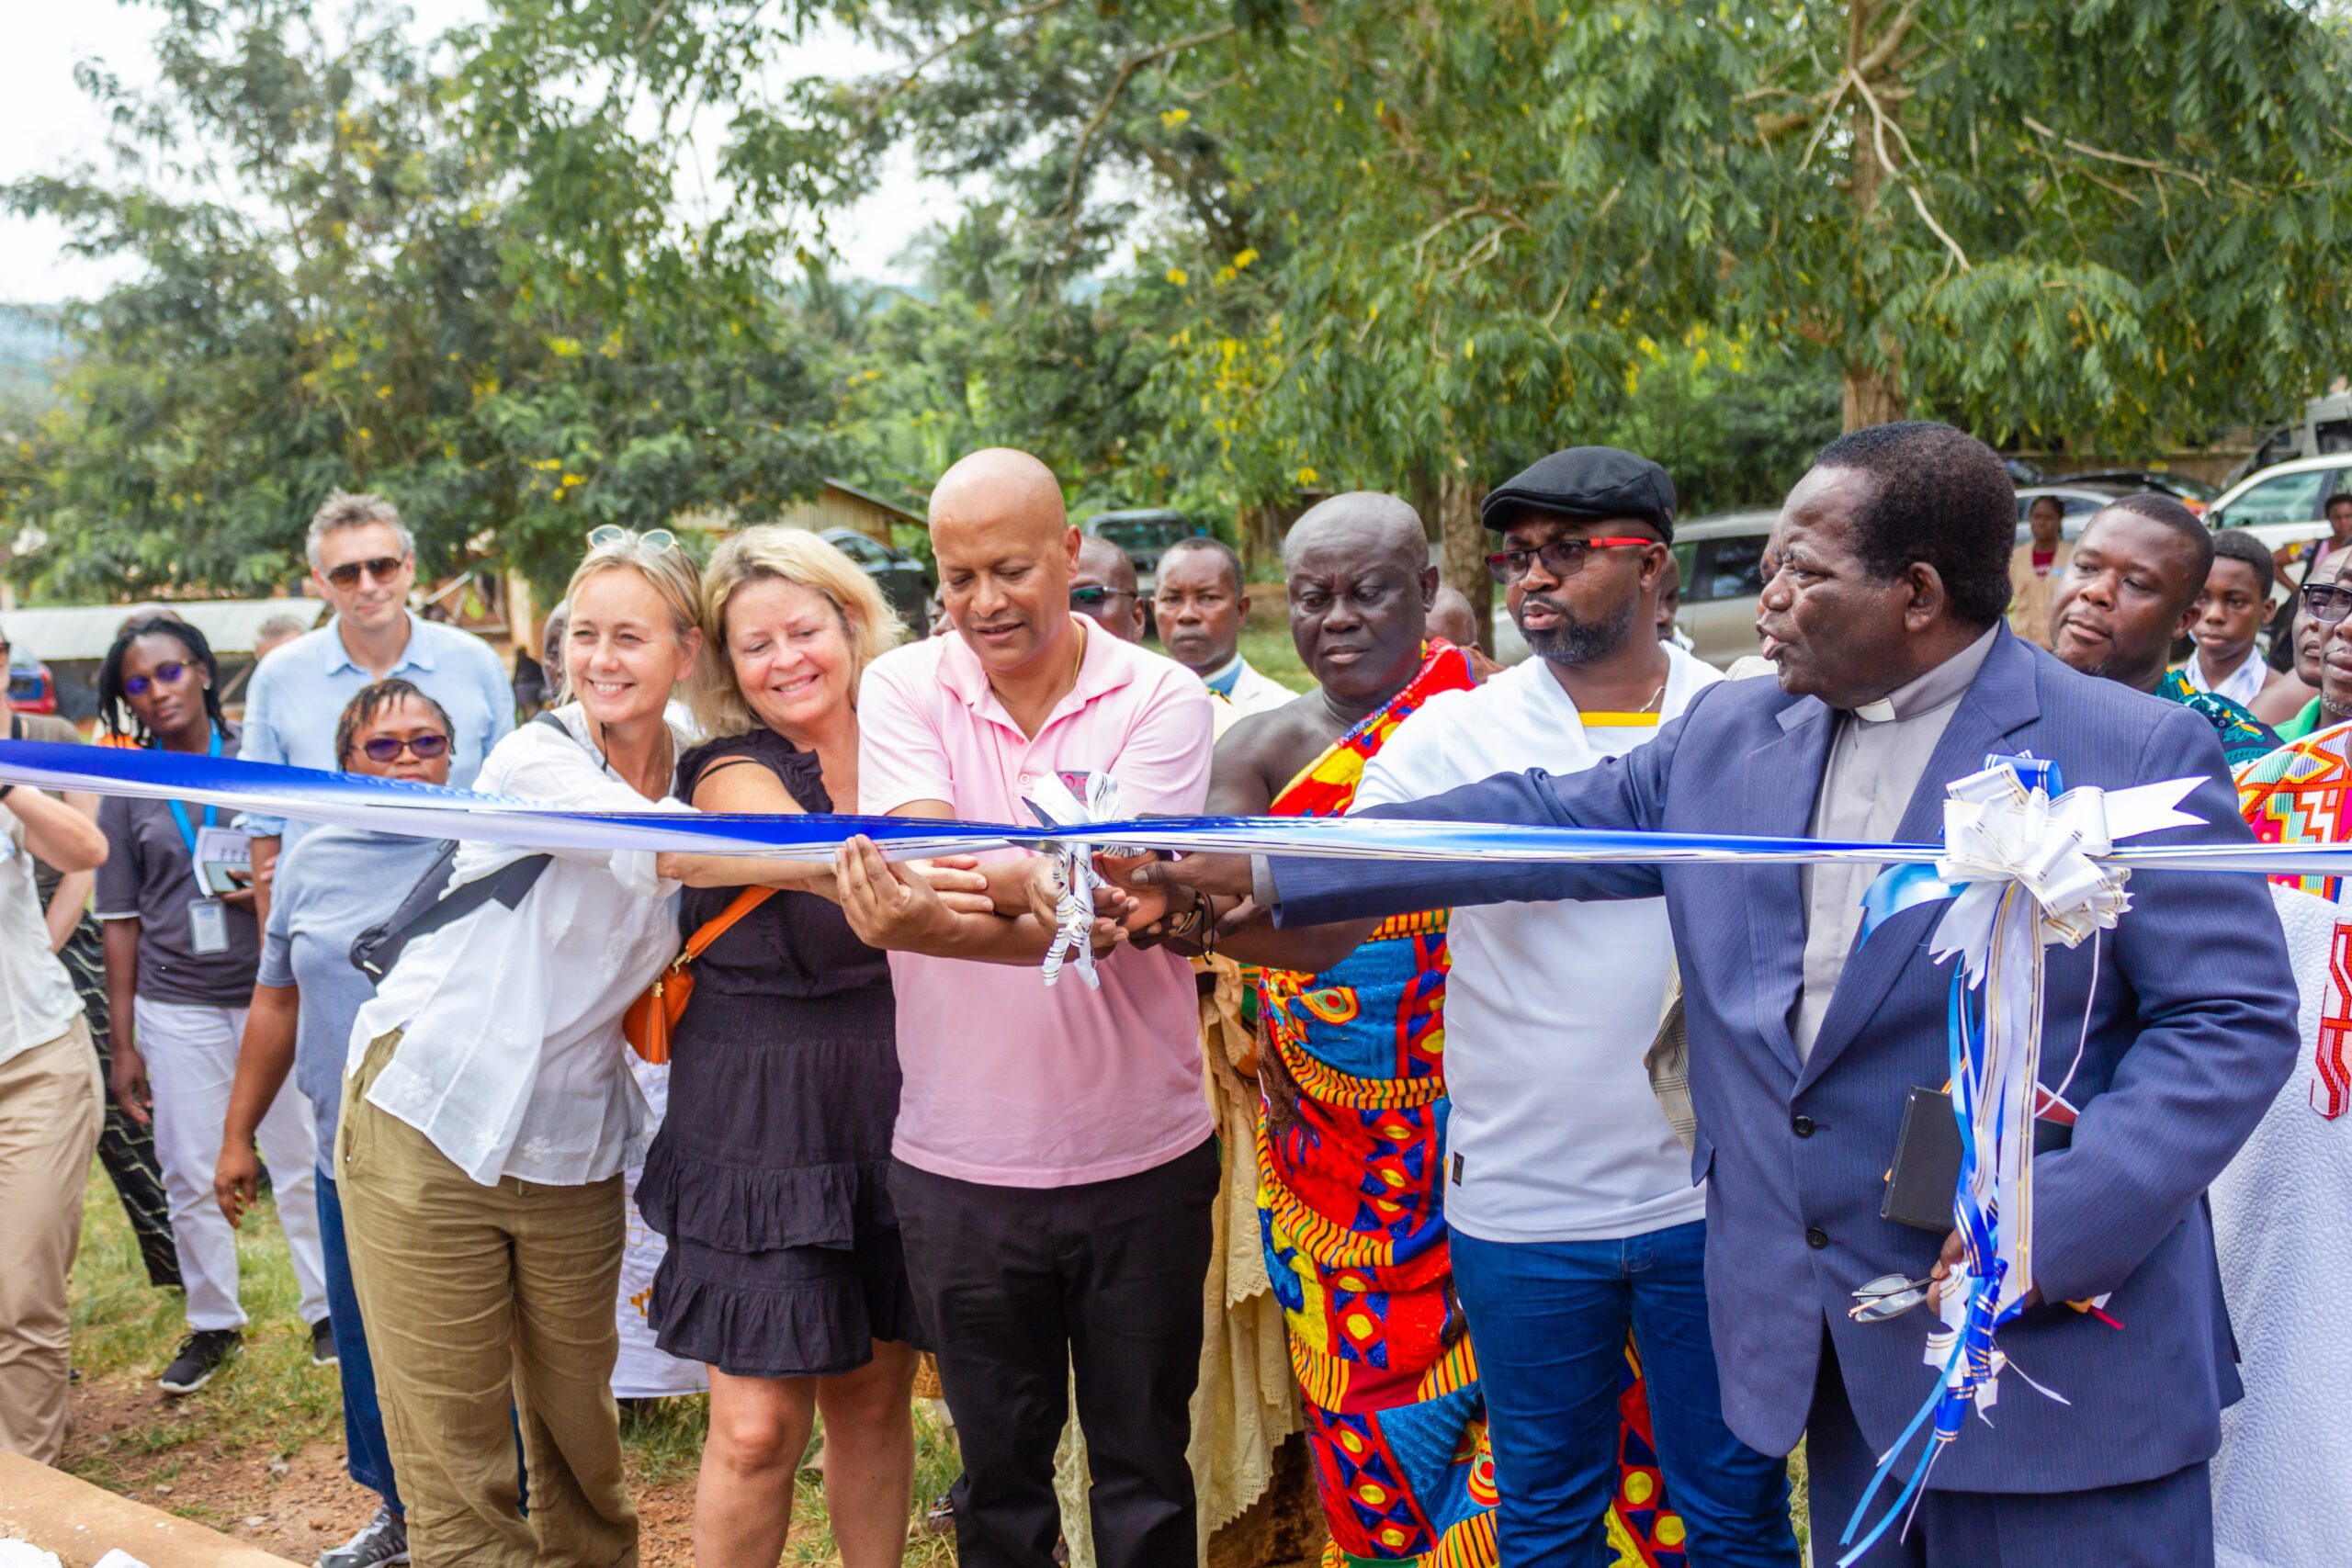 Plan International staff members and stakeholders cut a ribbon to open the new school building